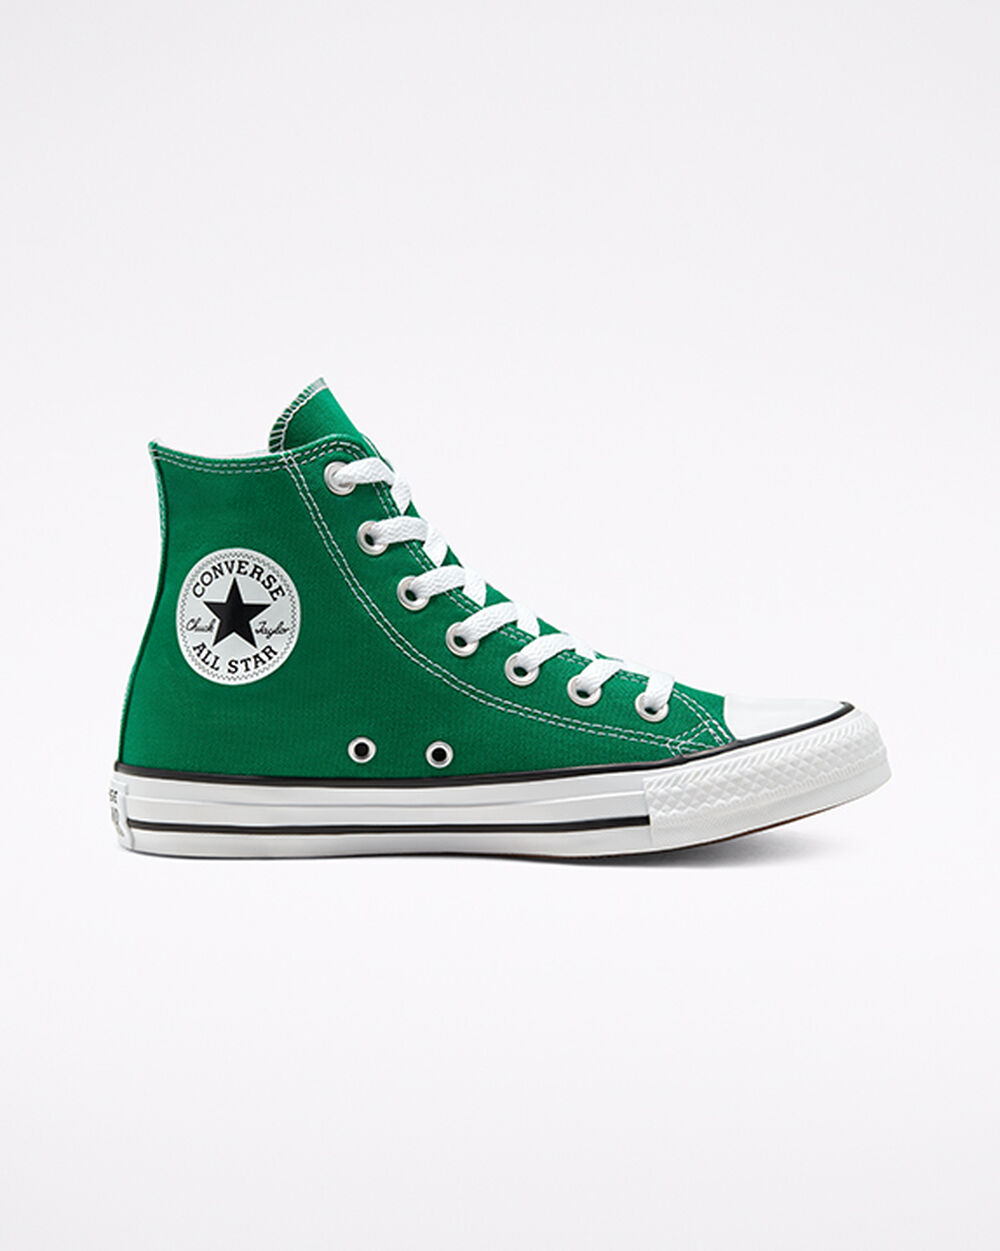 Tenis Converse Chuck Taylor All Star Mujer Verdes Blancos | Mexico-421066